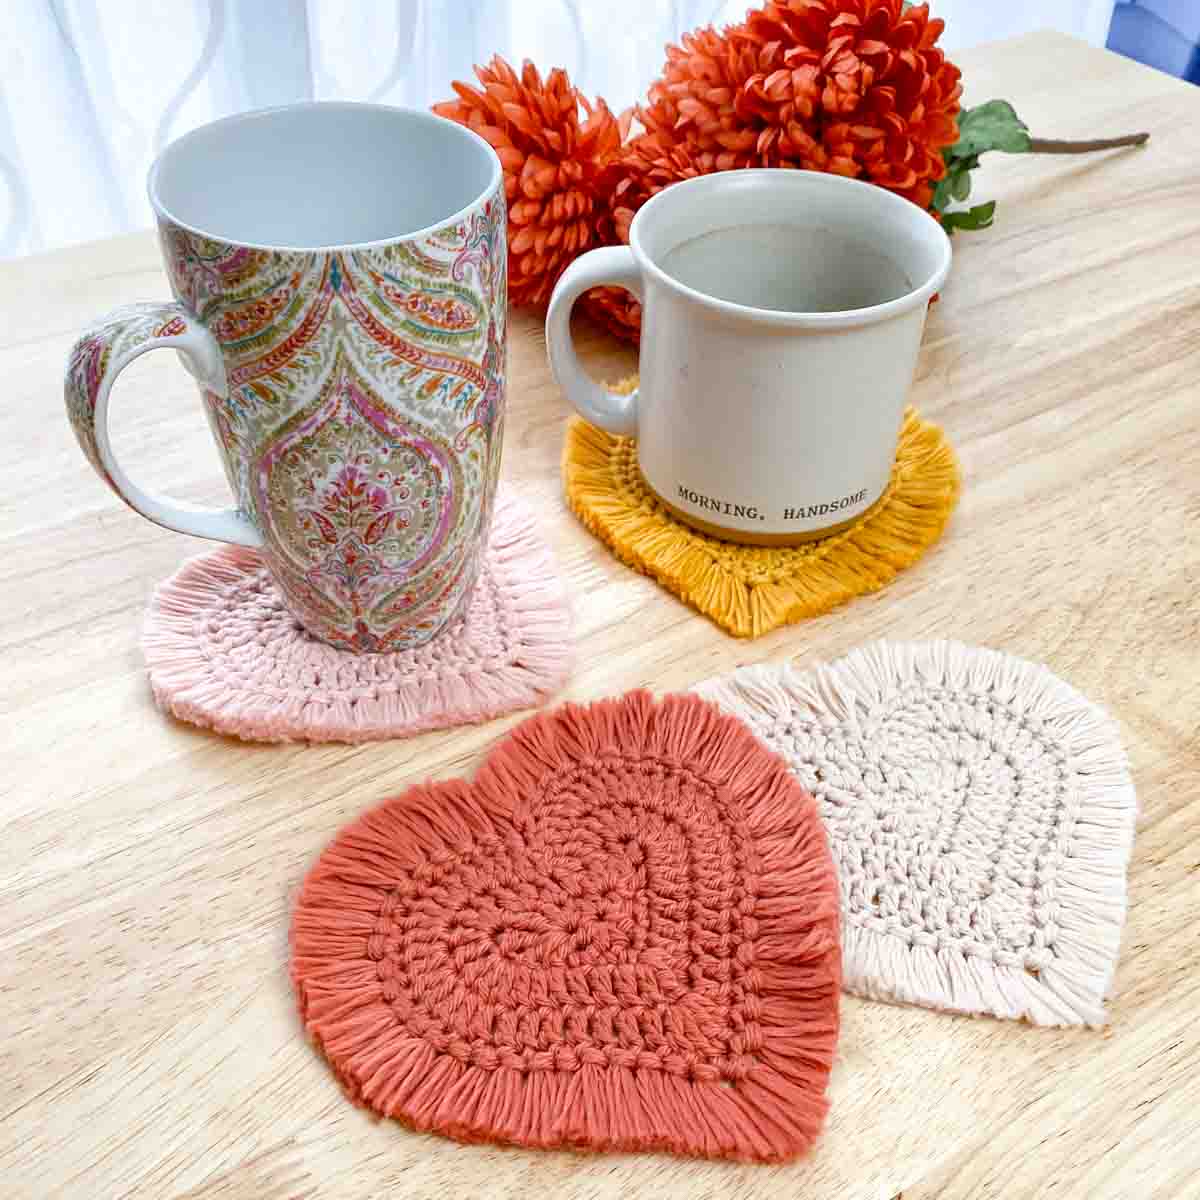 40 Ultimate Ways To Crochet Crafty Coasters For Home Decor - Briana K  Designs